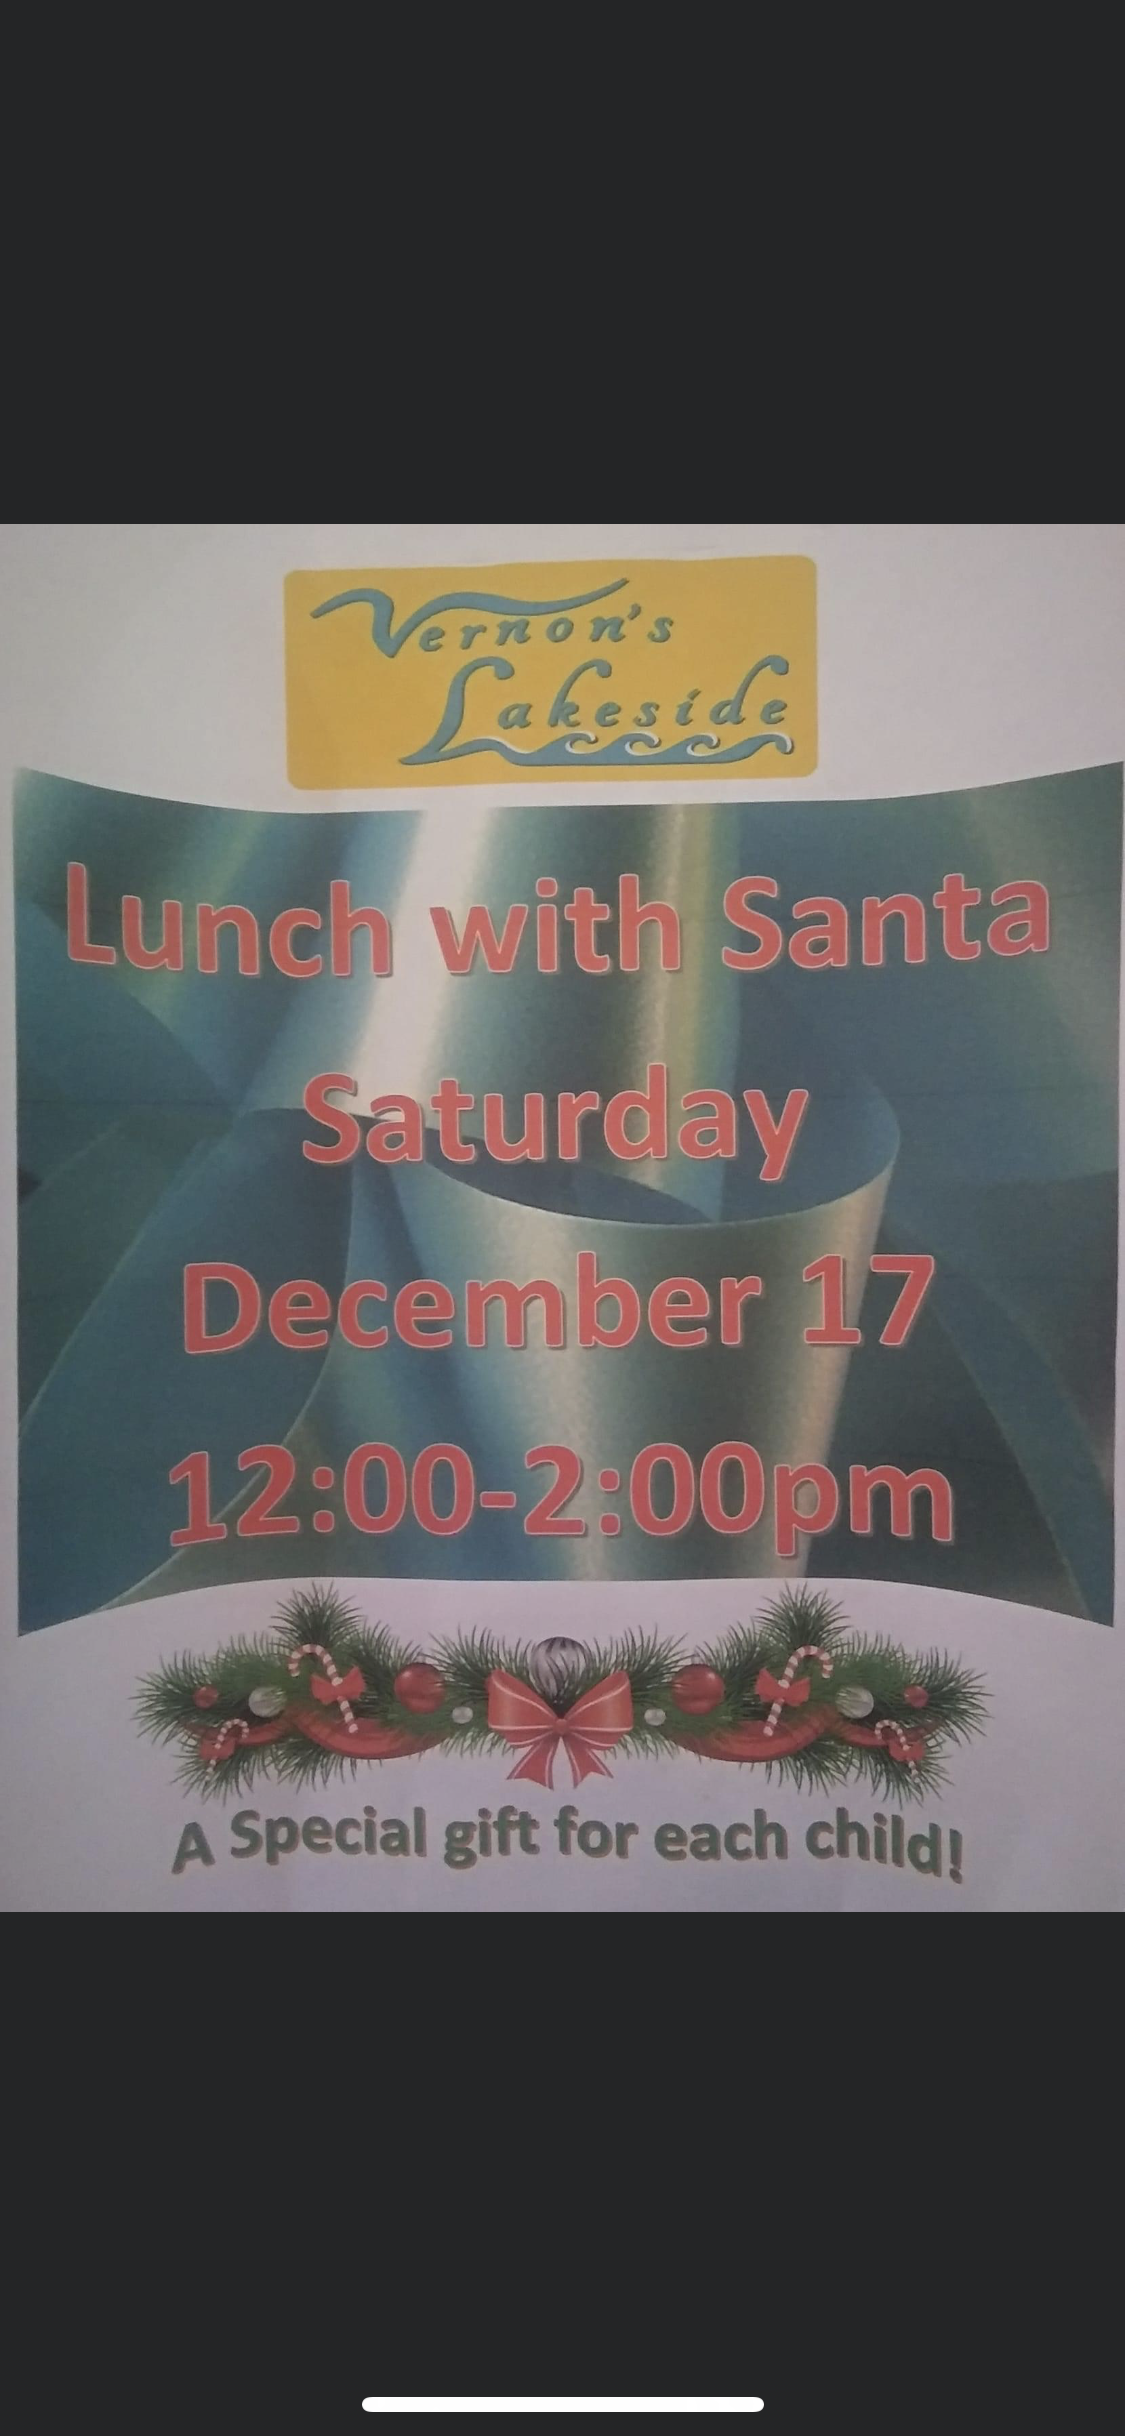 Lunch with Santa at Vernon's Lakeside 1 lunch with santa vernons CedarCreekLake.Online